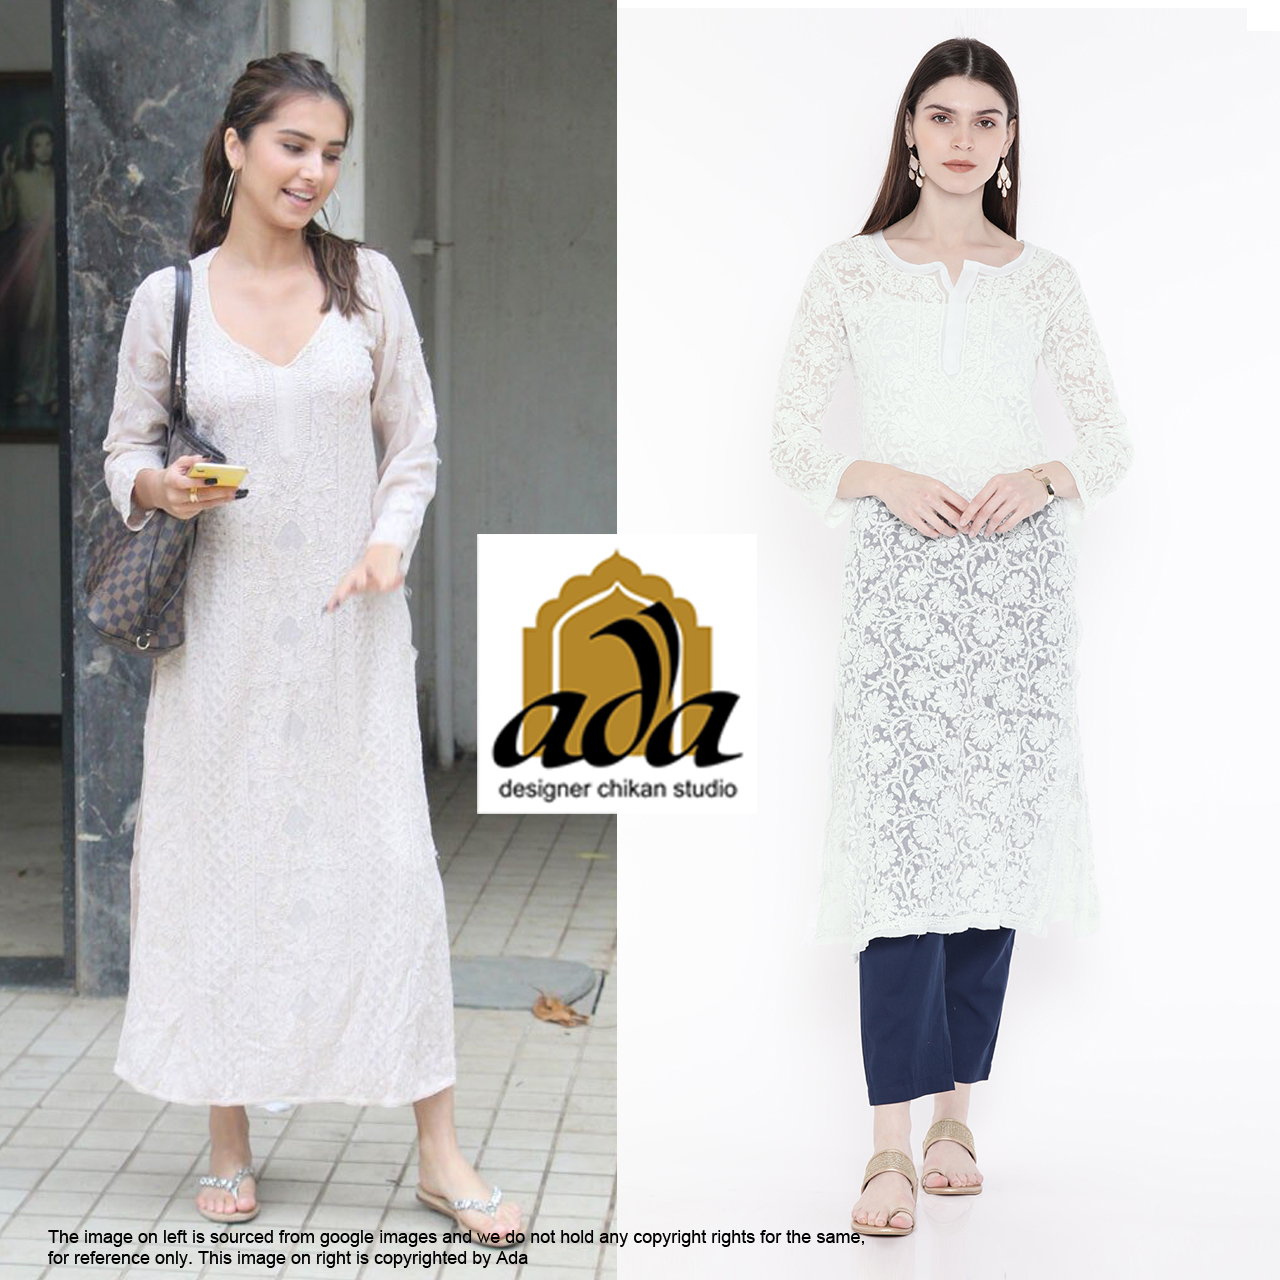 In this image we see Tara Sutaria heading out during a sunny day in an ivory white chikankari Kurta next to her car and you can shop for a similar white CHIKANKARI DRESS from WWW.ADACHIKAN.COM